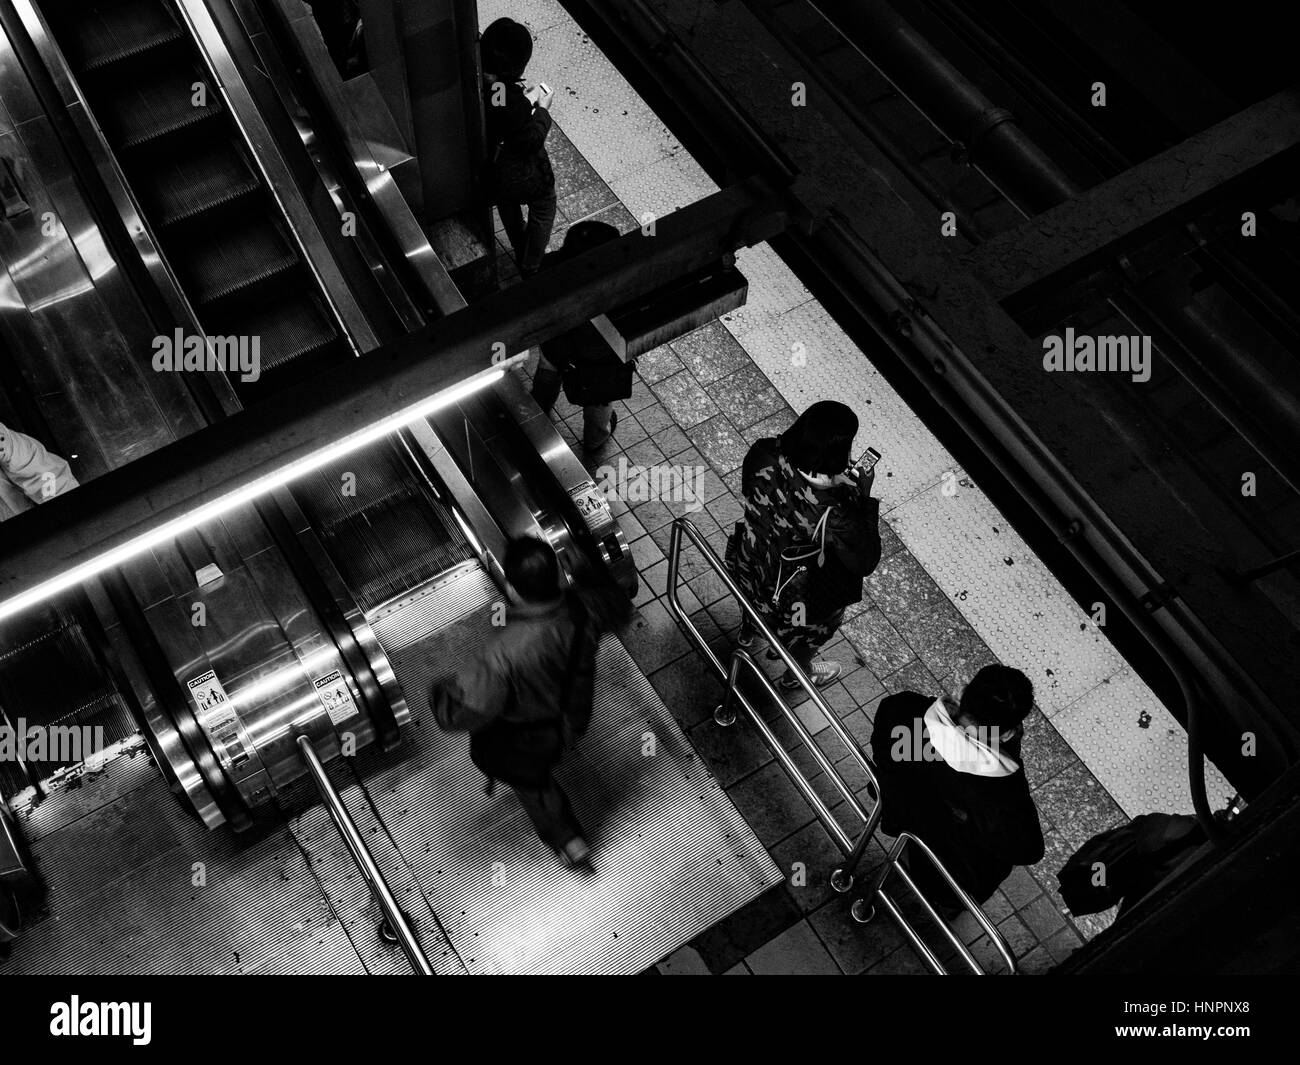 New York Subway System. Commuters use phones while they wait. Stock Photo